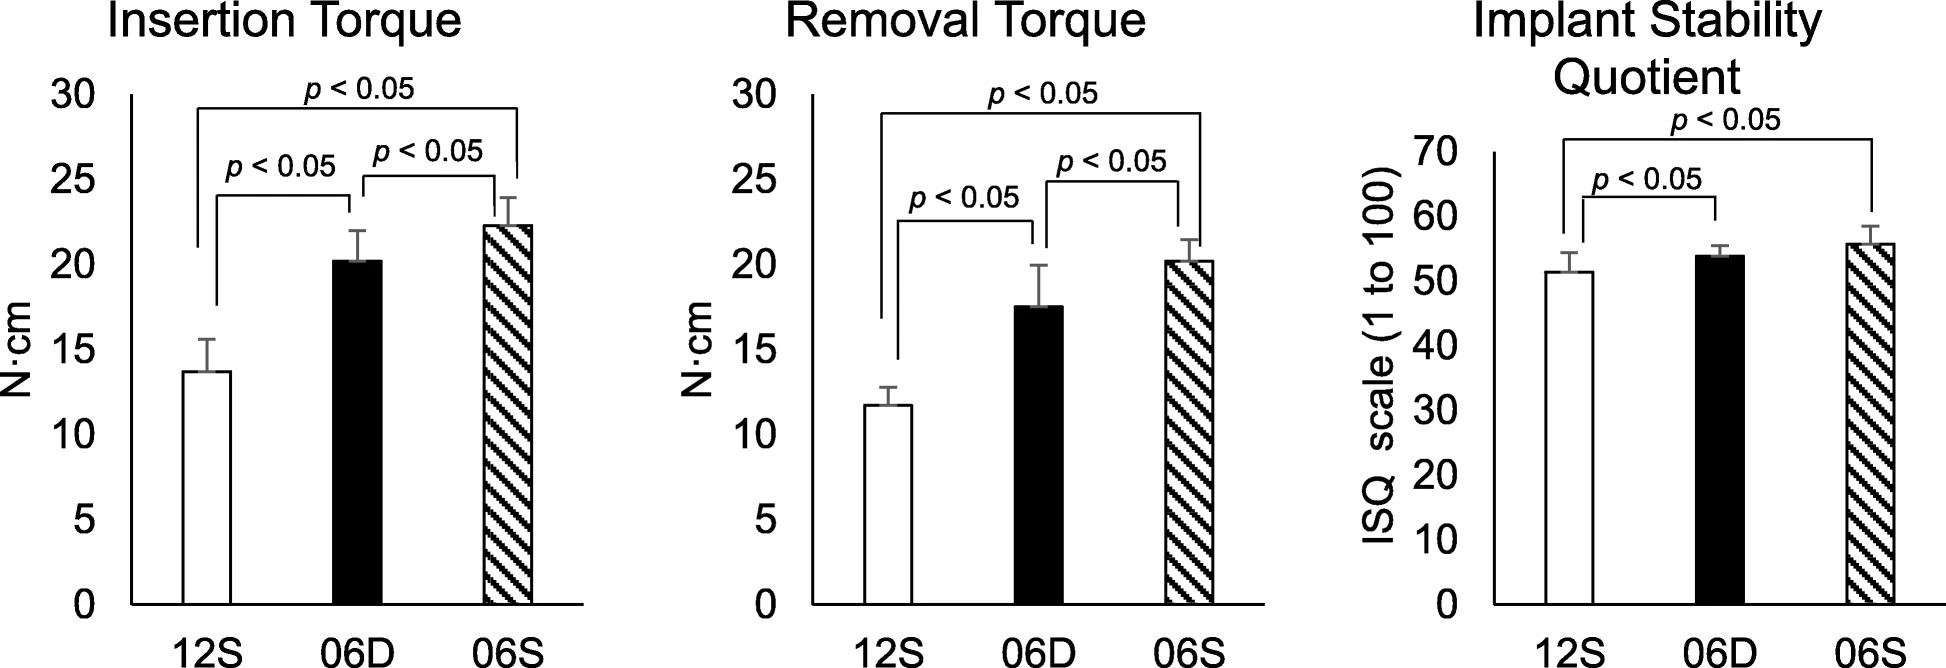 Figure 2. Insertion torque (IT), removal torque (RT), and implant stability quotient (ISQ)